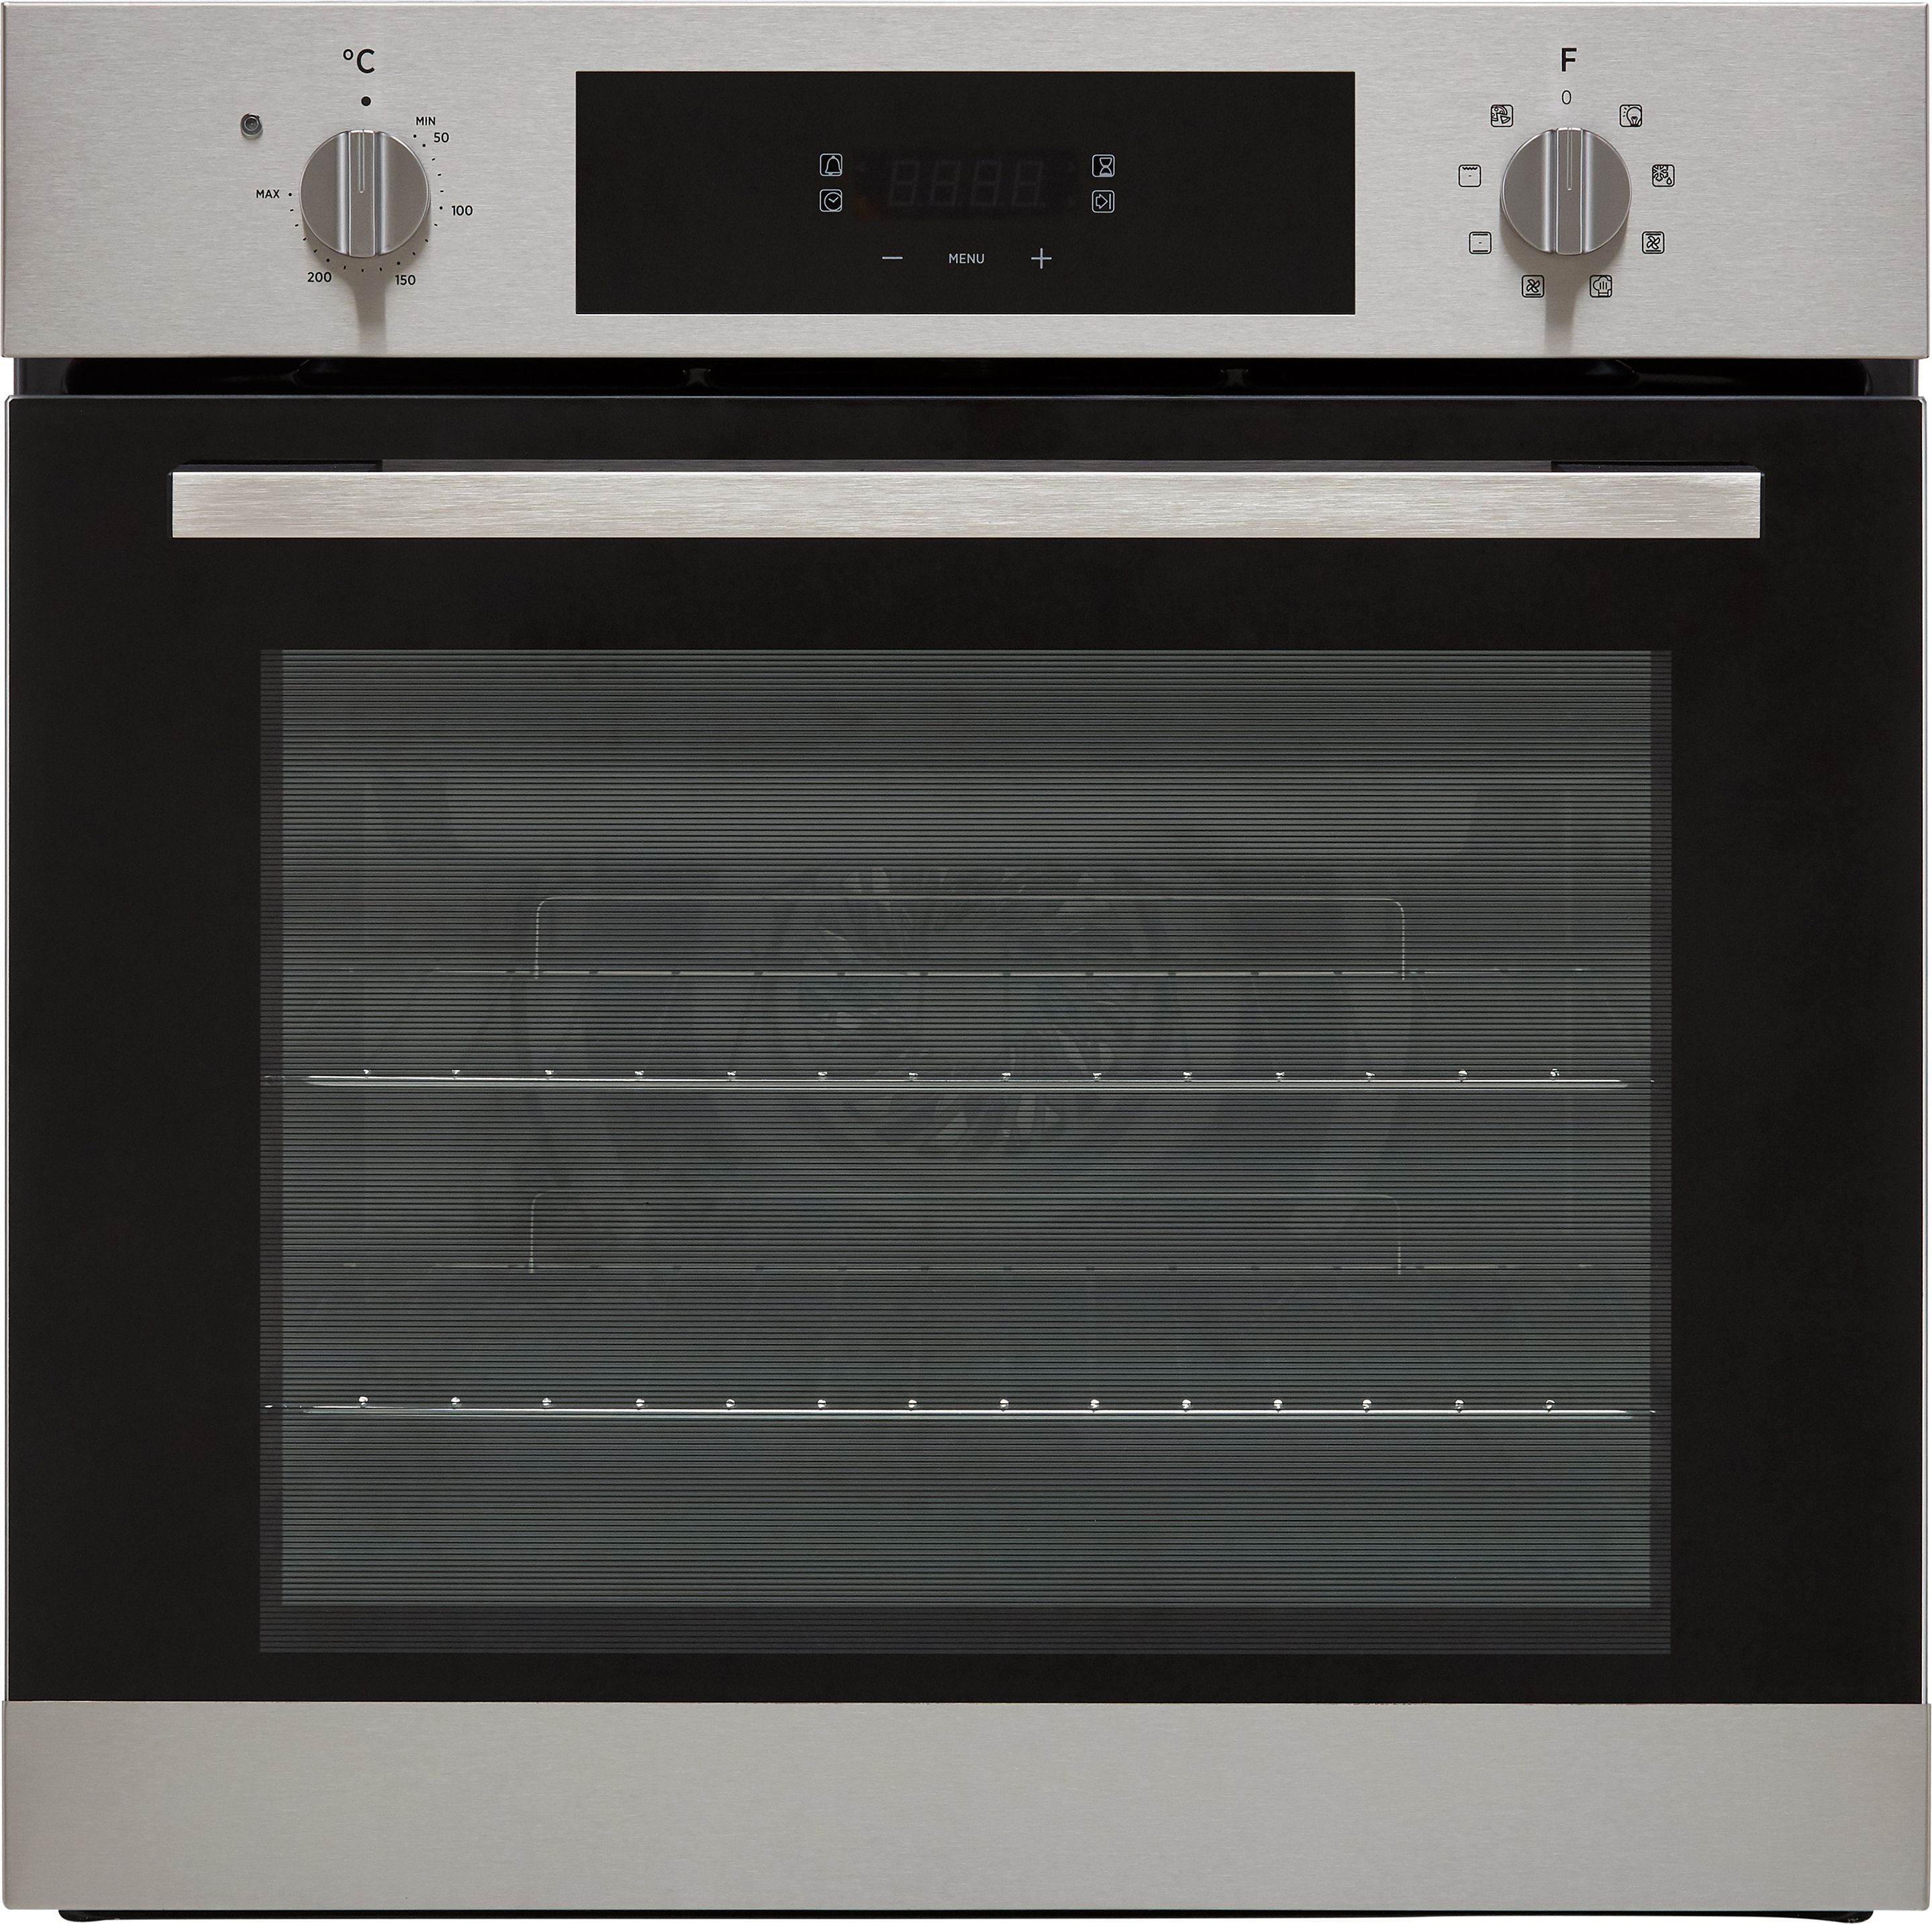 Hoover H-OVEN 300 HOC3BF3258IN Built In Electric Single Oven - Stainless Steel - A+ Rated, Stainless Steel